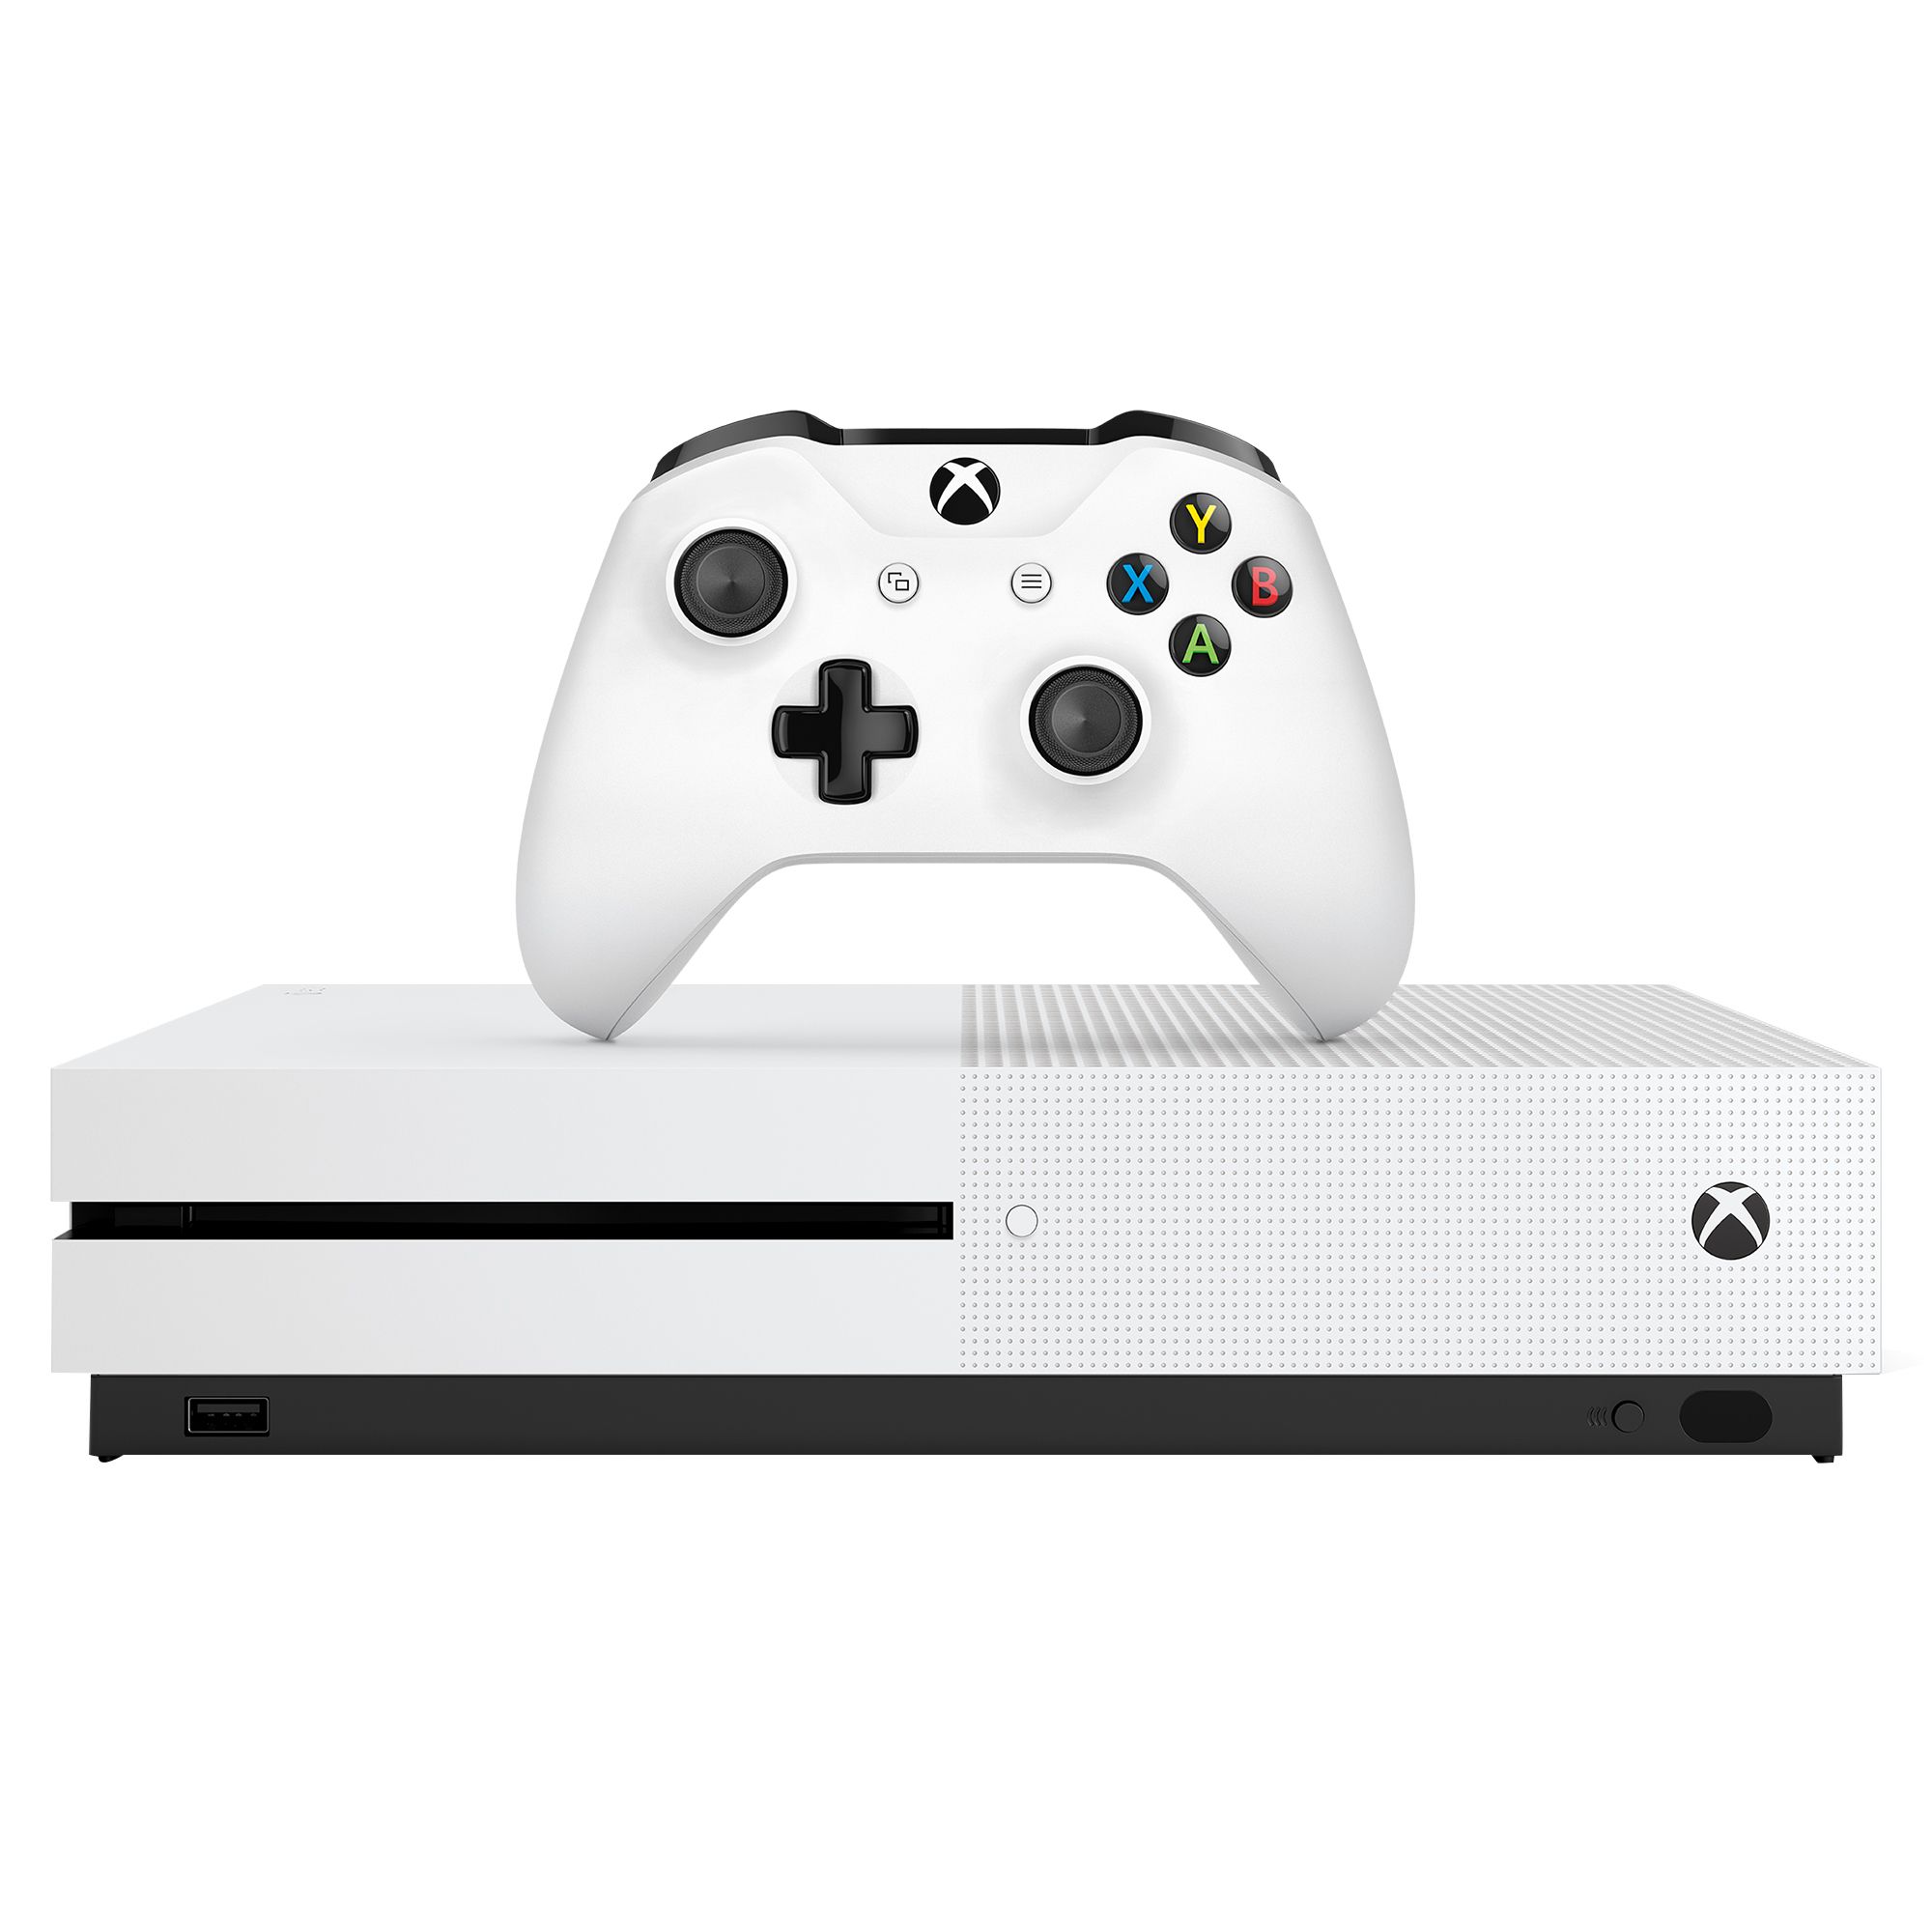 graphics card in xbox one s